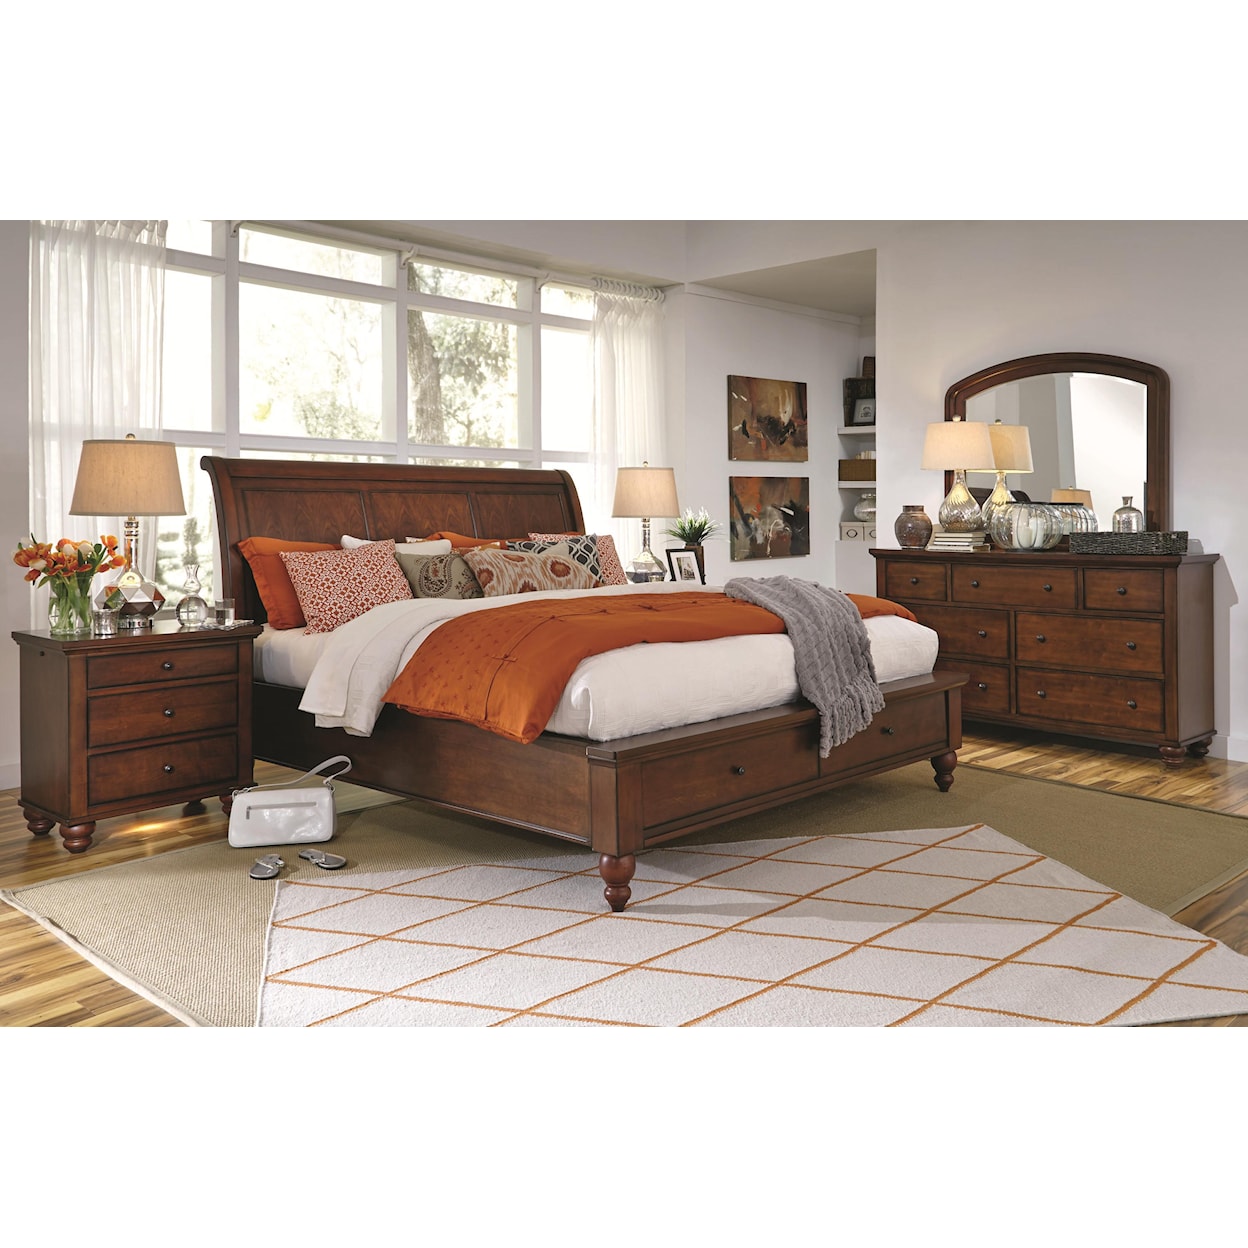 Aspenhome Clinton Clinton Queen Sleigh Bed with Storage